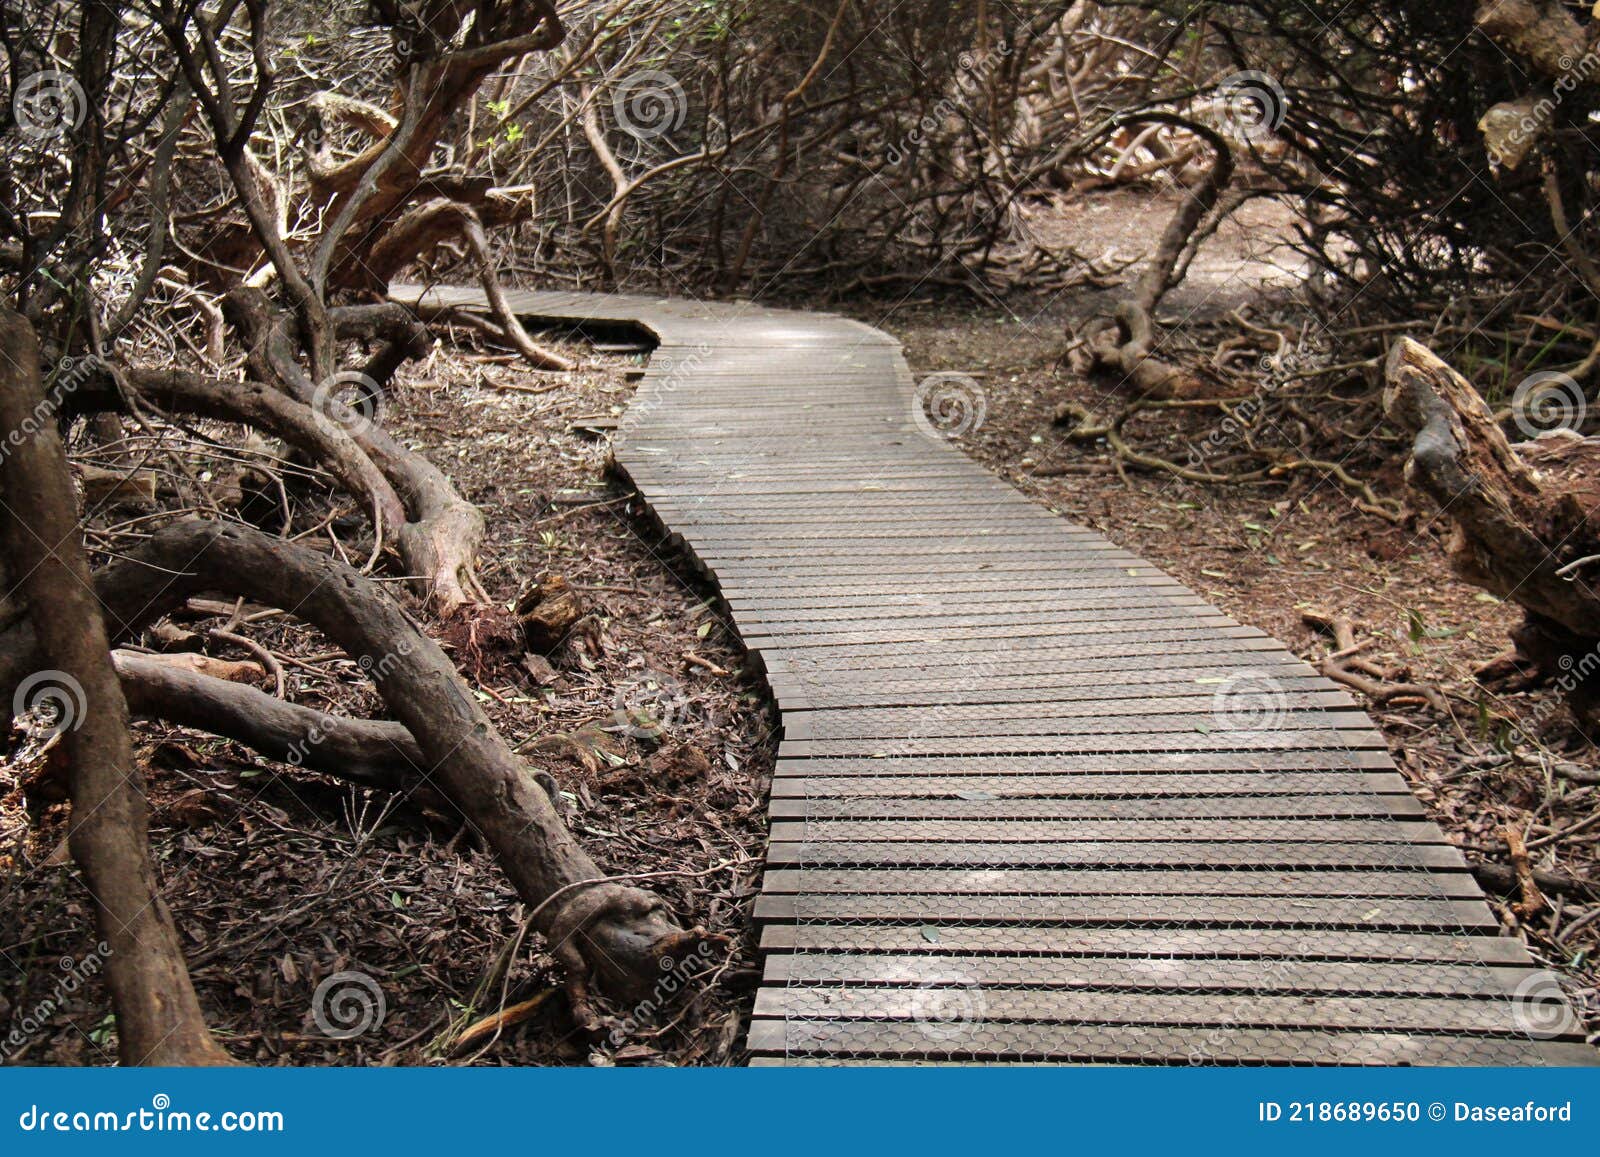 Wooden Boardwalk Stock Photo Image Of Outdoors Countryside 218689650